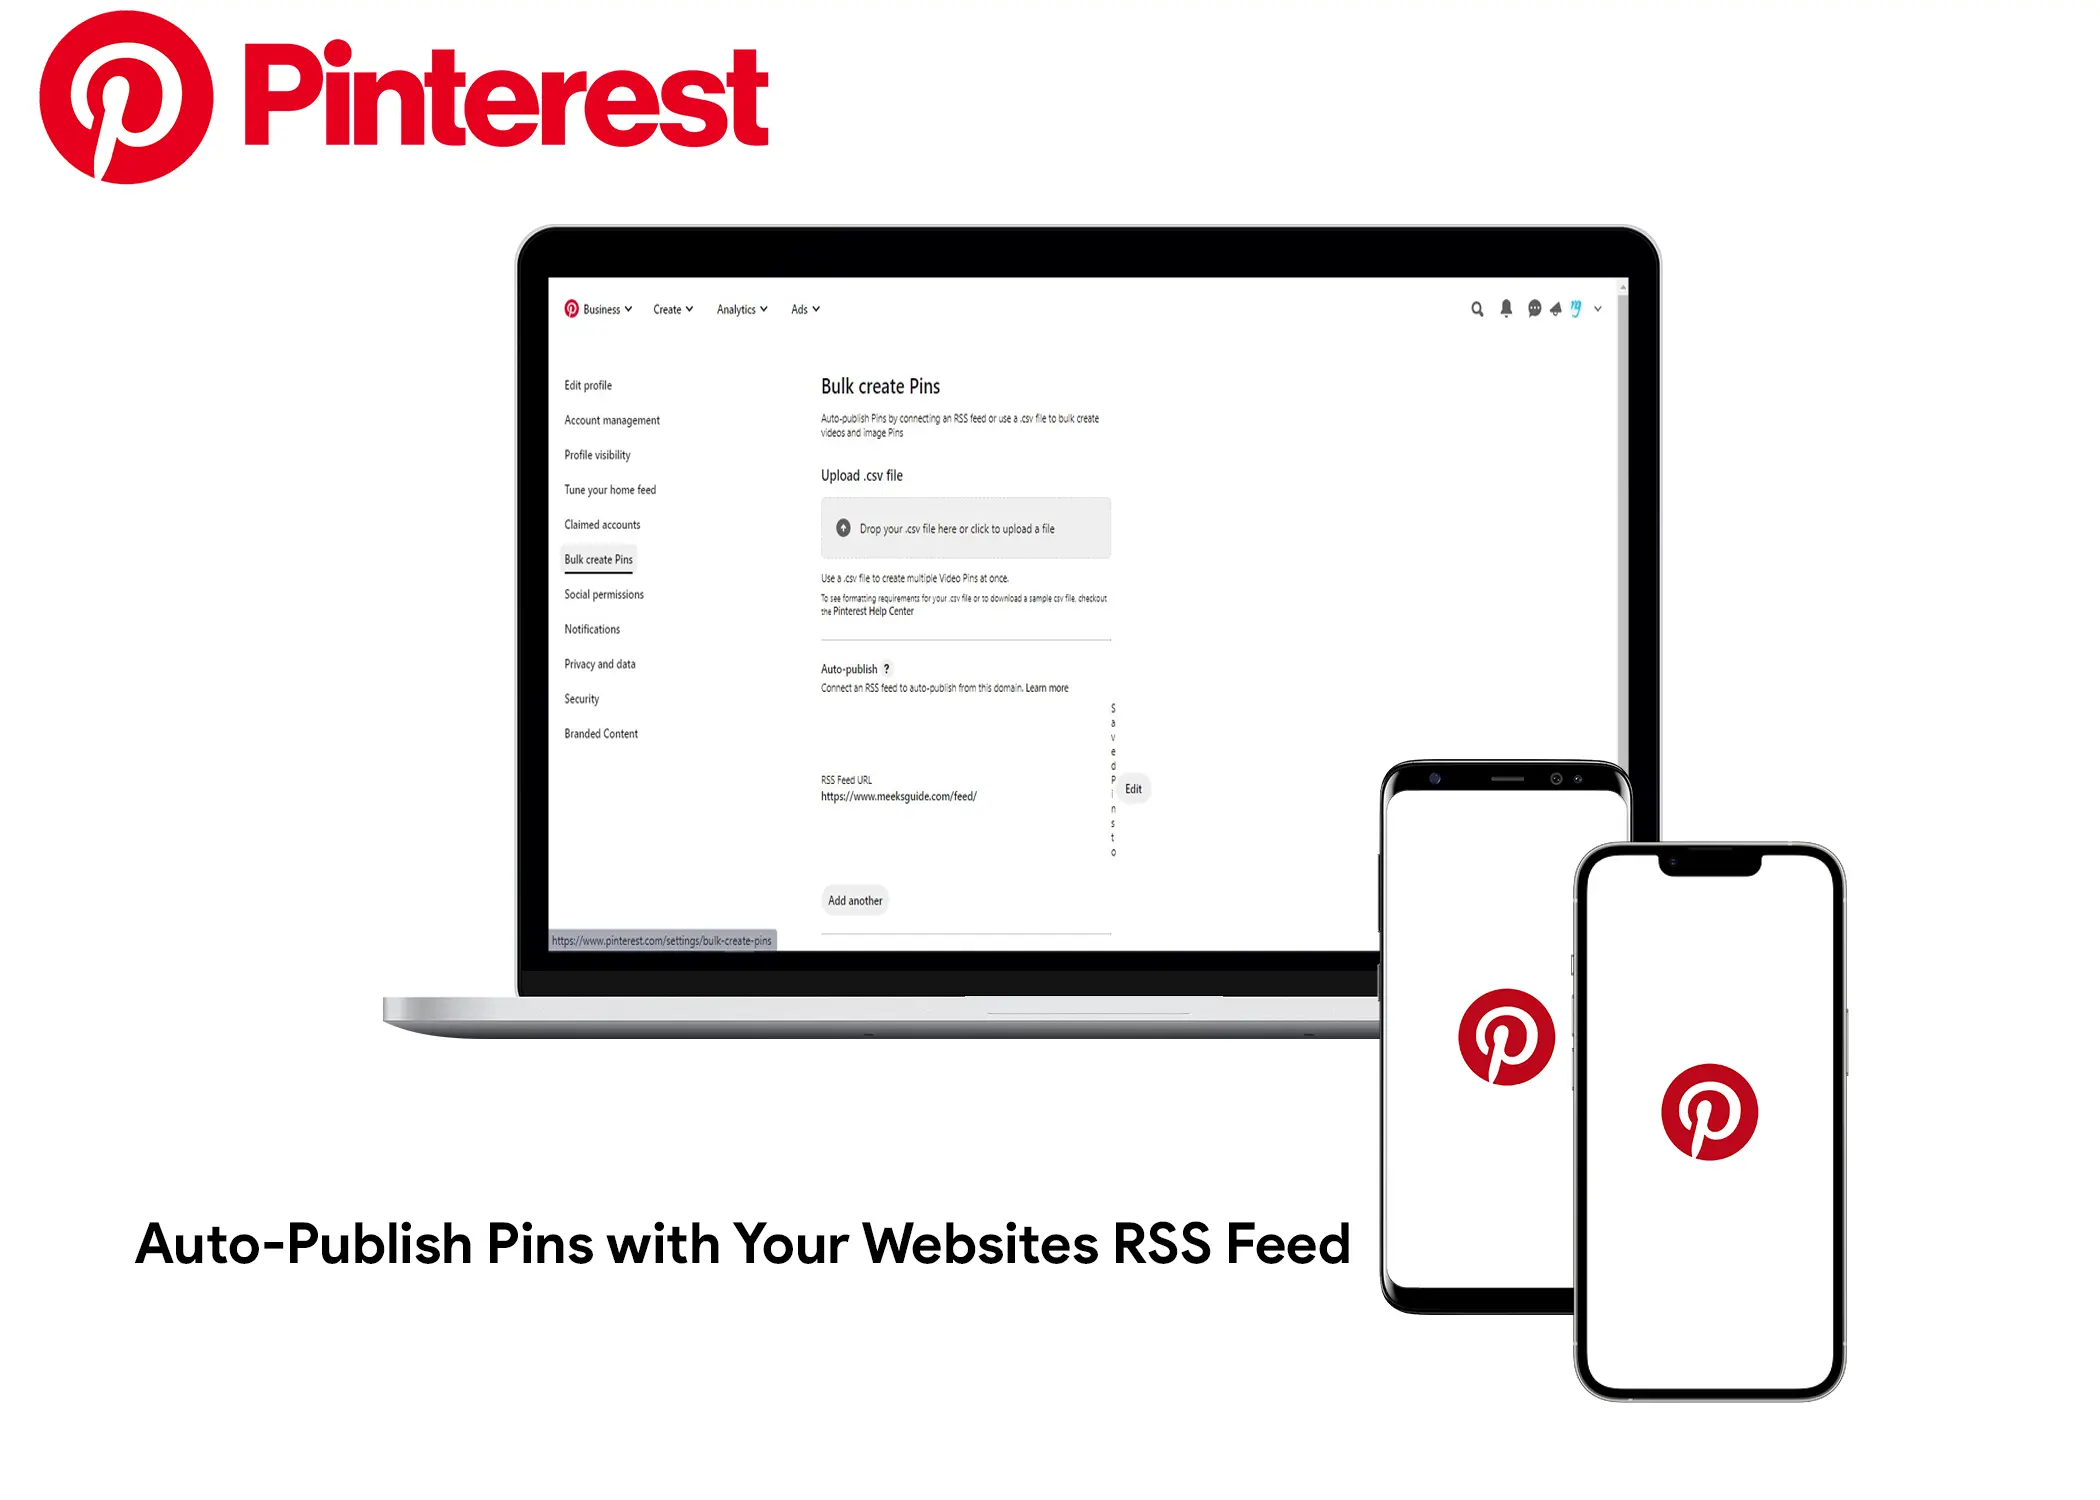 Pinterest - How to Auto-Publish Pins with Your Websites RSS Feed